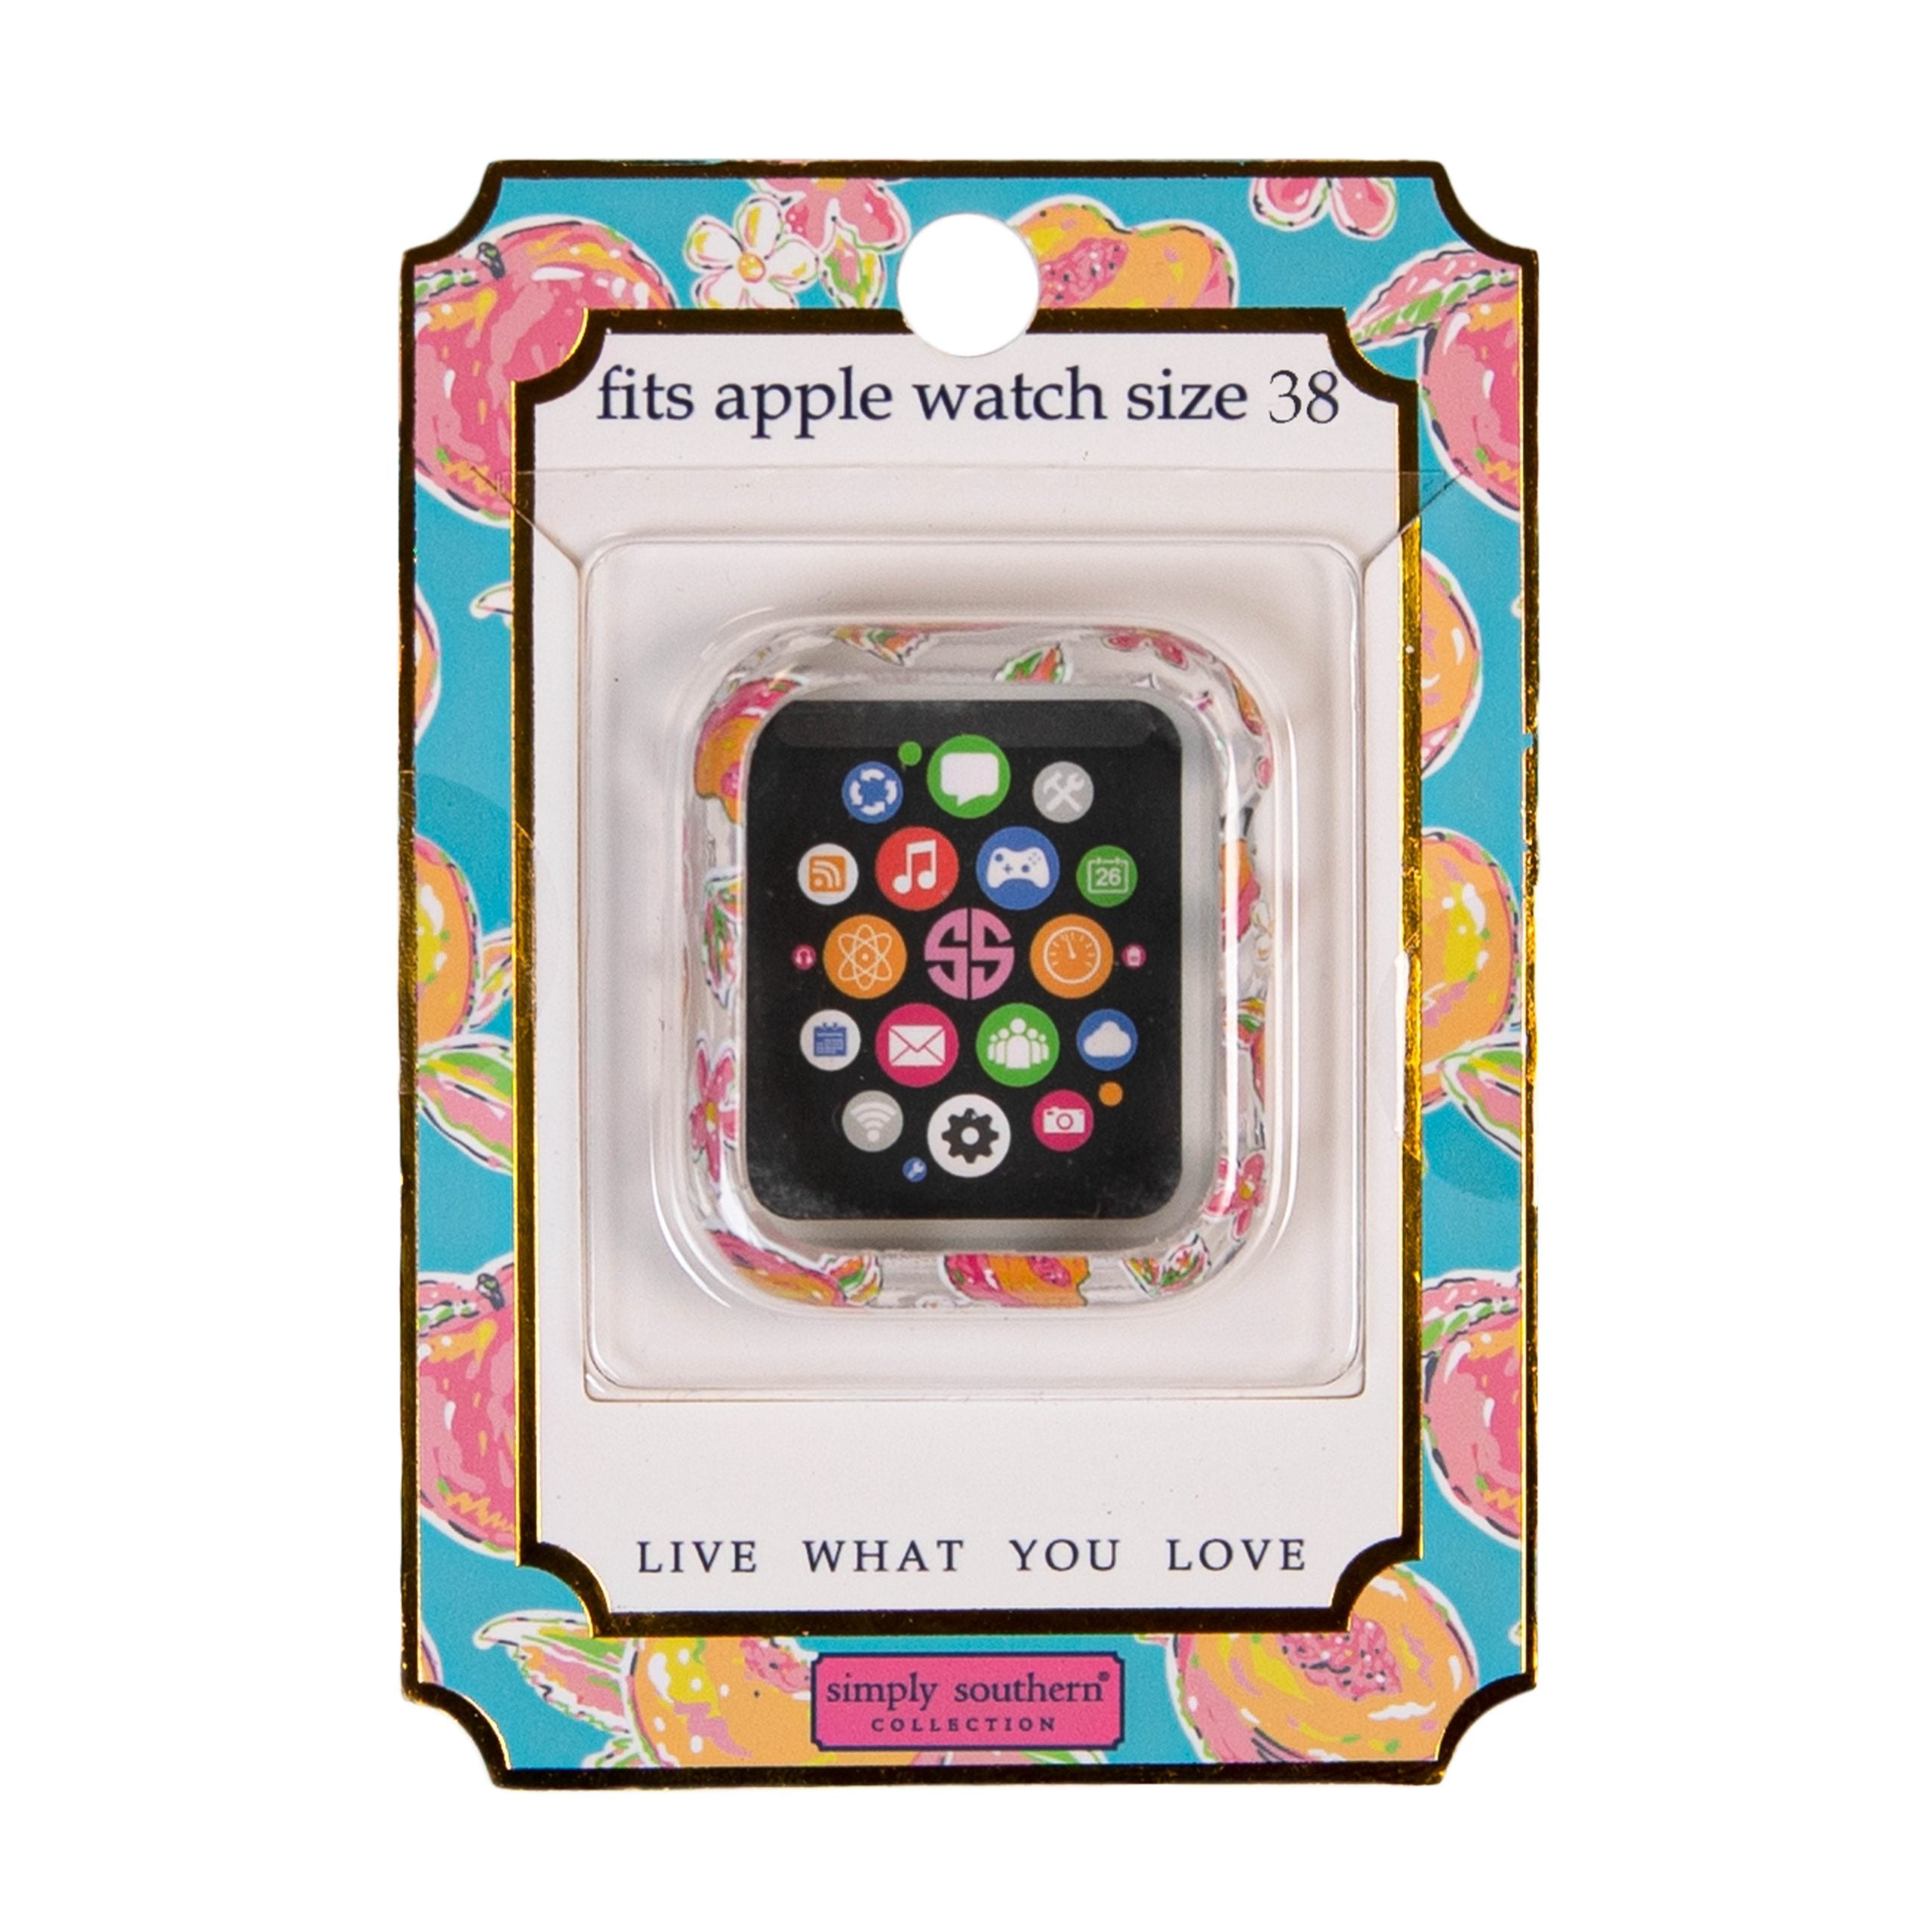 Apple watch bumper from Simply Southern size 38